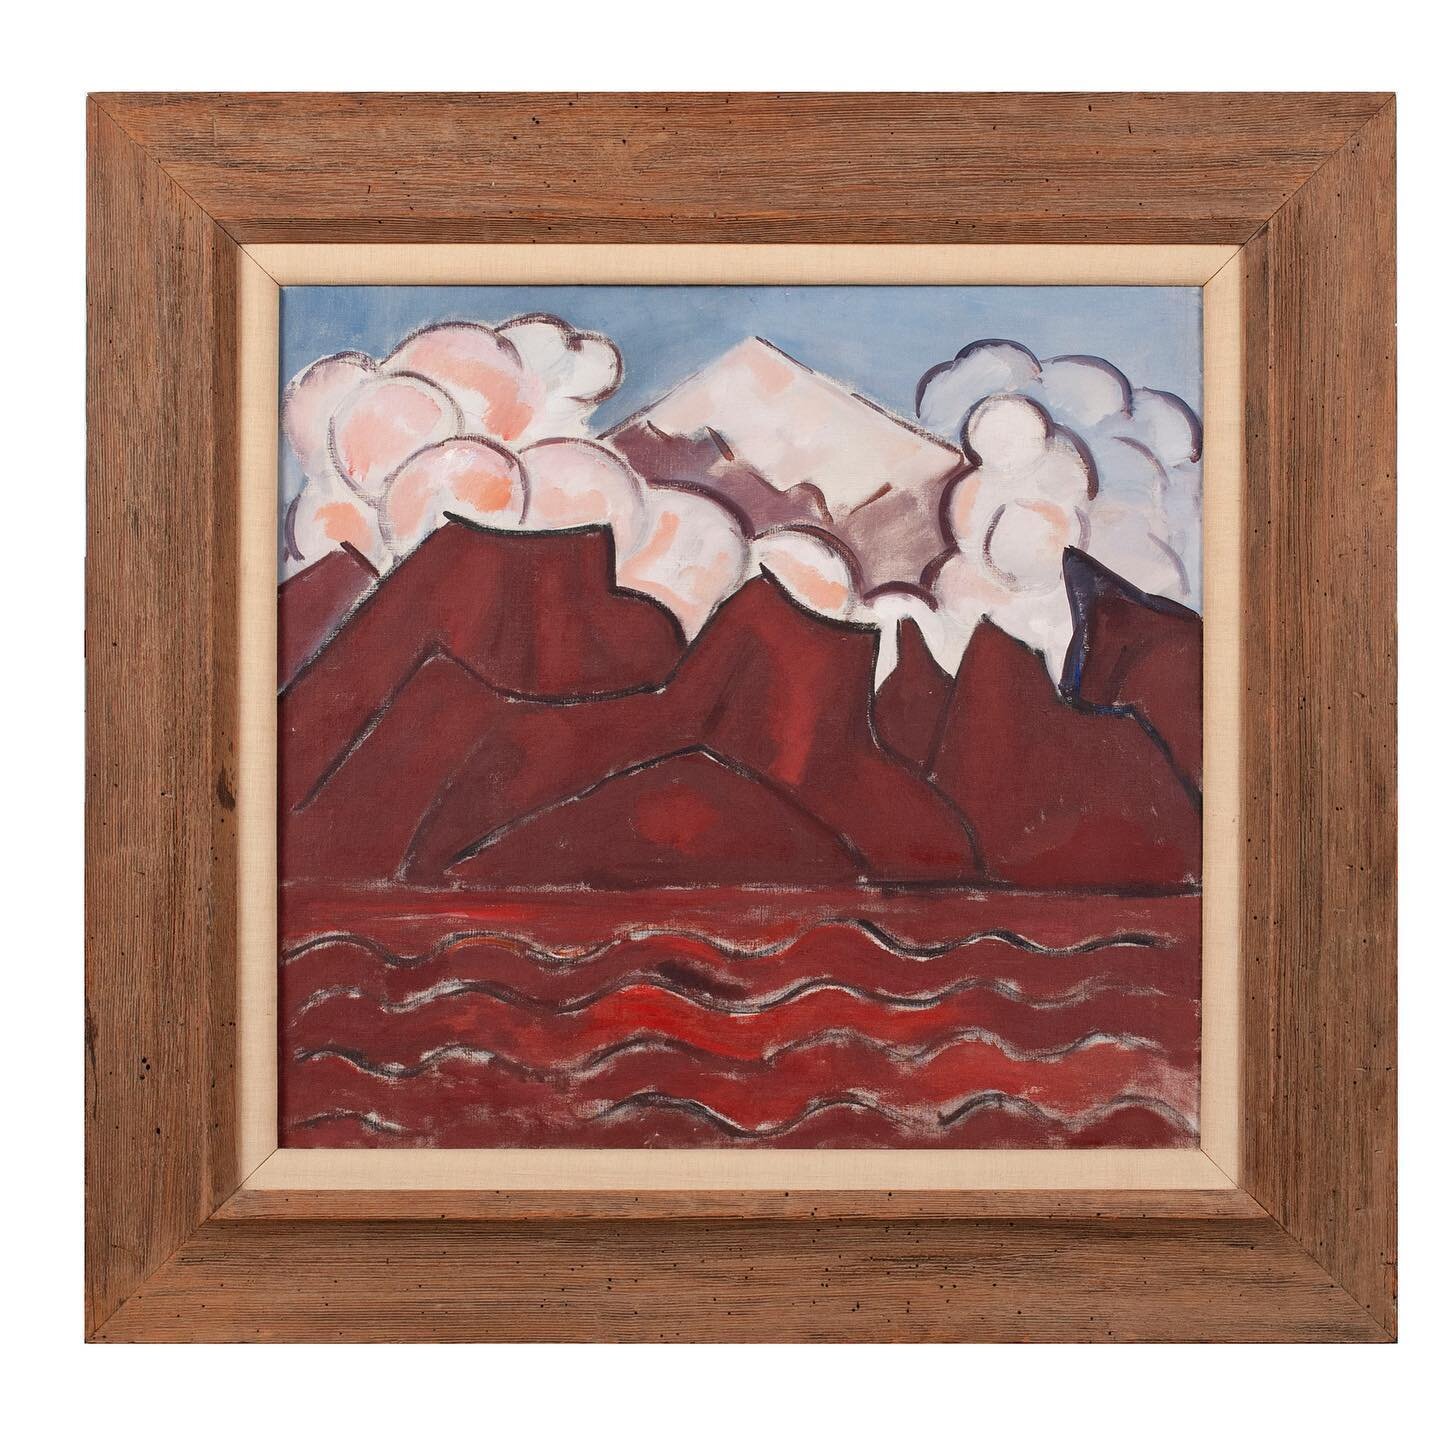 UPDATE: SOLD! $552,000...congrats 🎉@selkirkauctions!
.
.
.
Selling SATURDAY 1/9/21...on offer at Selkirk Auctioneers St. Louis - an important and recently rediscovered Marsden Hartley landscape circa 1932 depicting the magnificent Popocatépetl volc